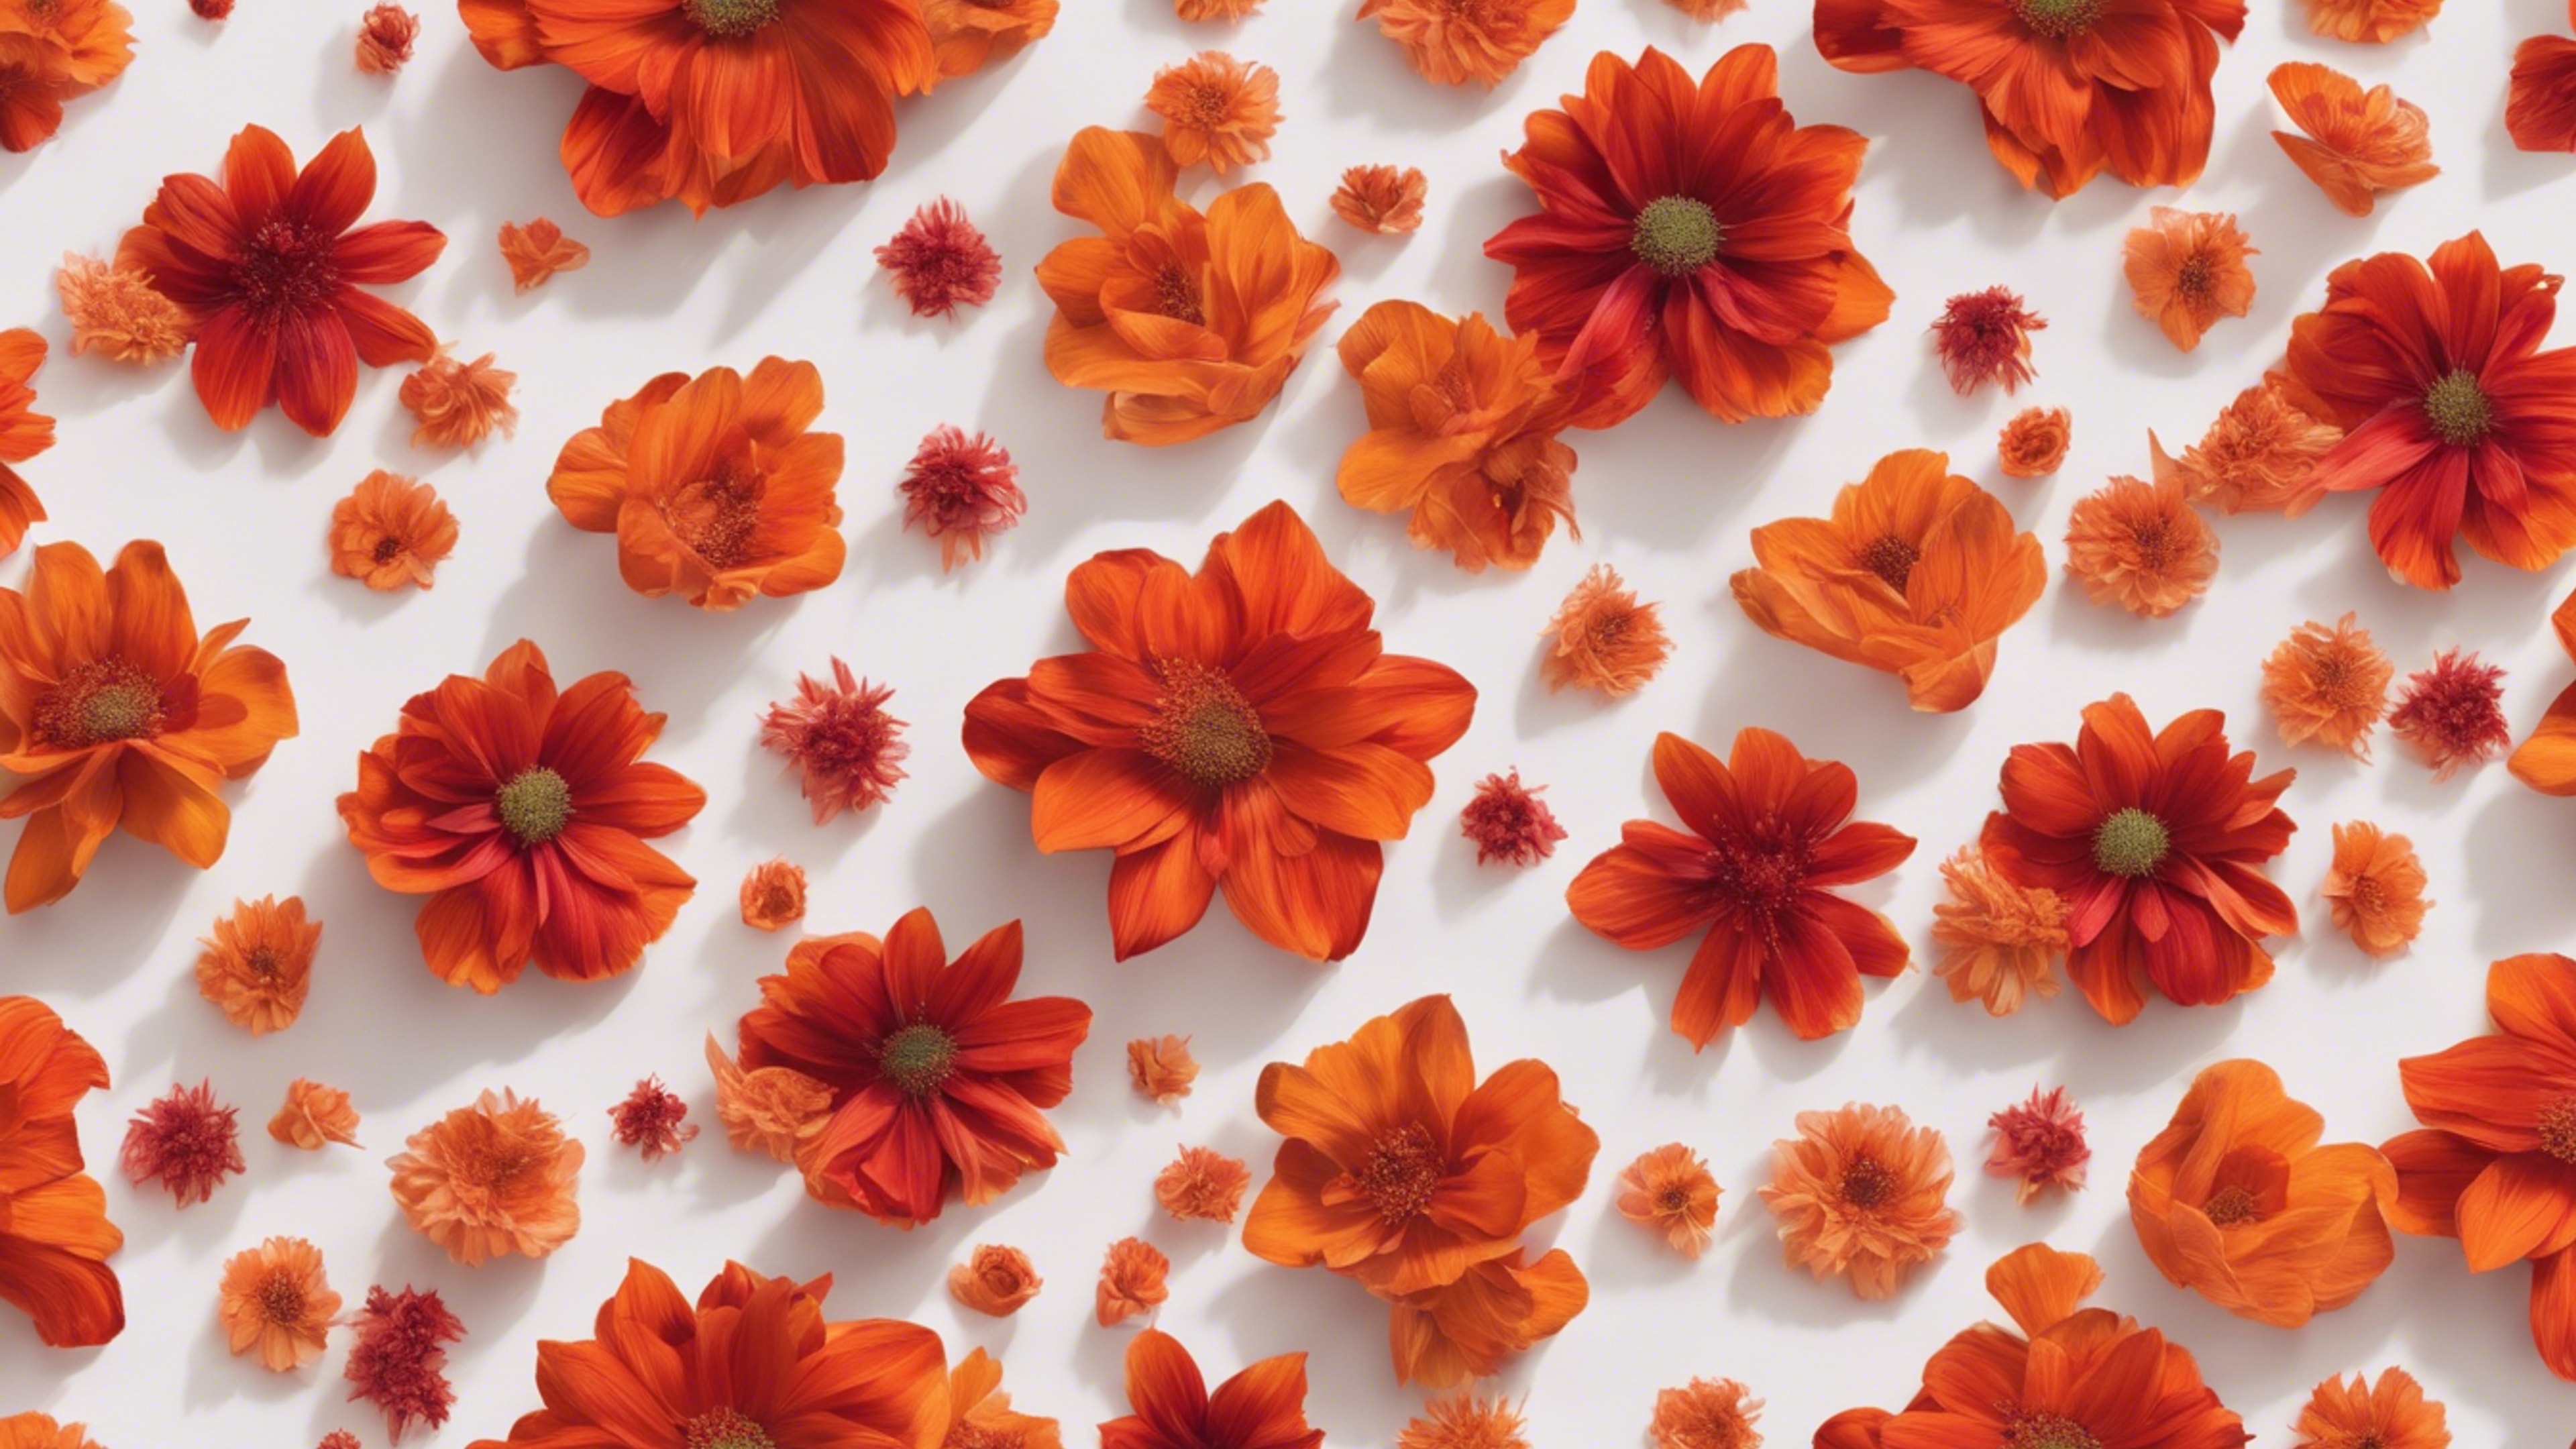 Vibrantly swirling patterns of red and orange flowers that consist of delicate petals and leaves in a seamless layout. Tapet[1a3317c1e5234fee8b43]